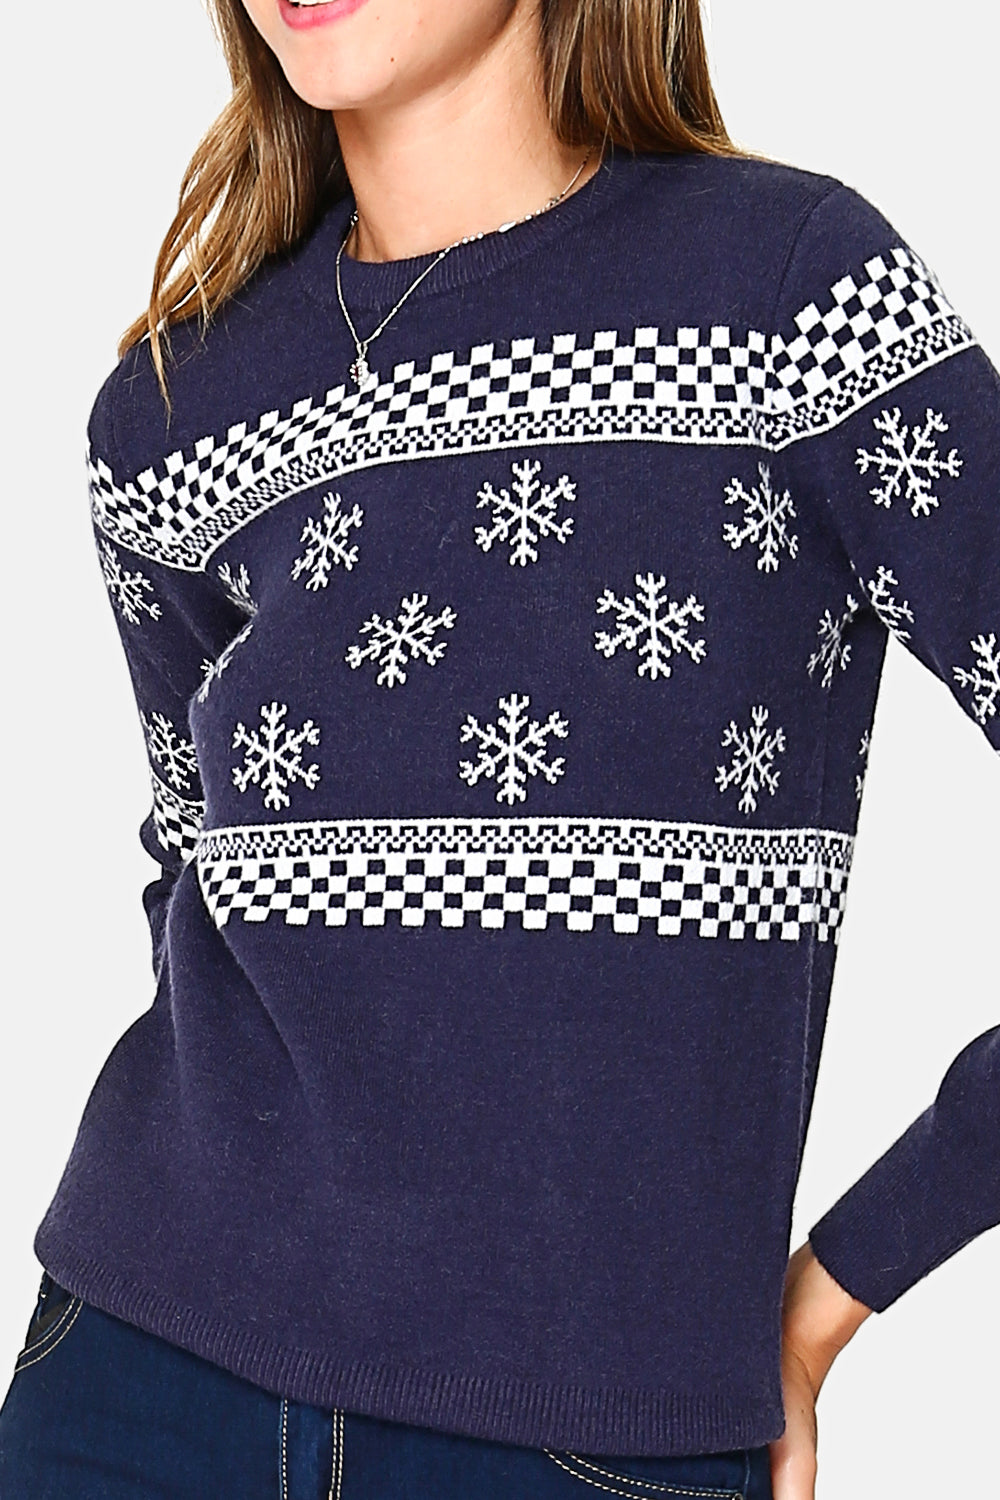 Fancy knit Christmas sweater with round neckline